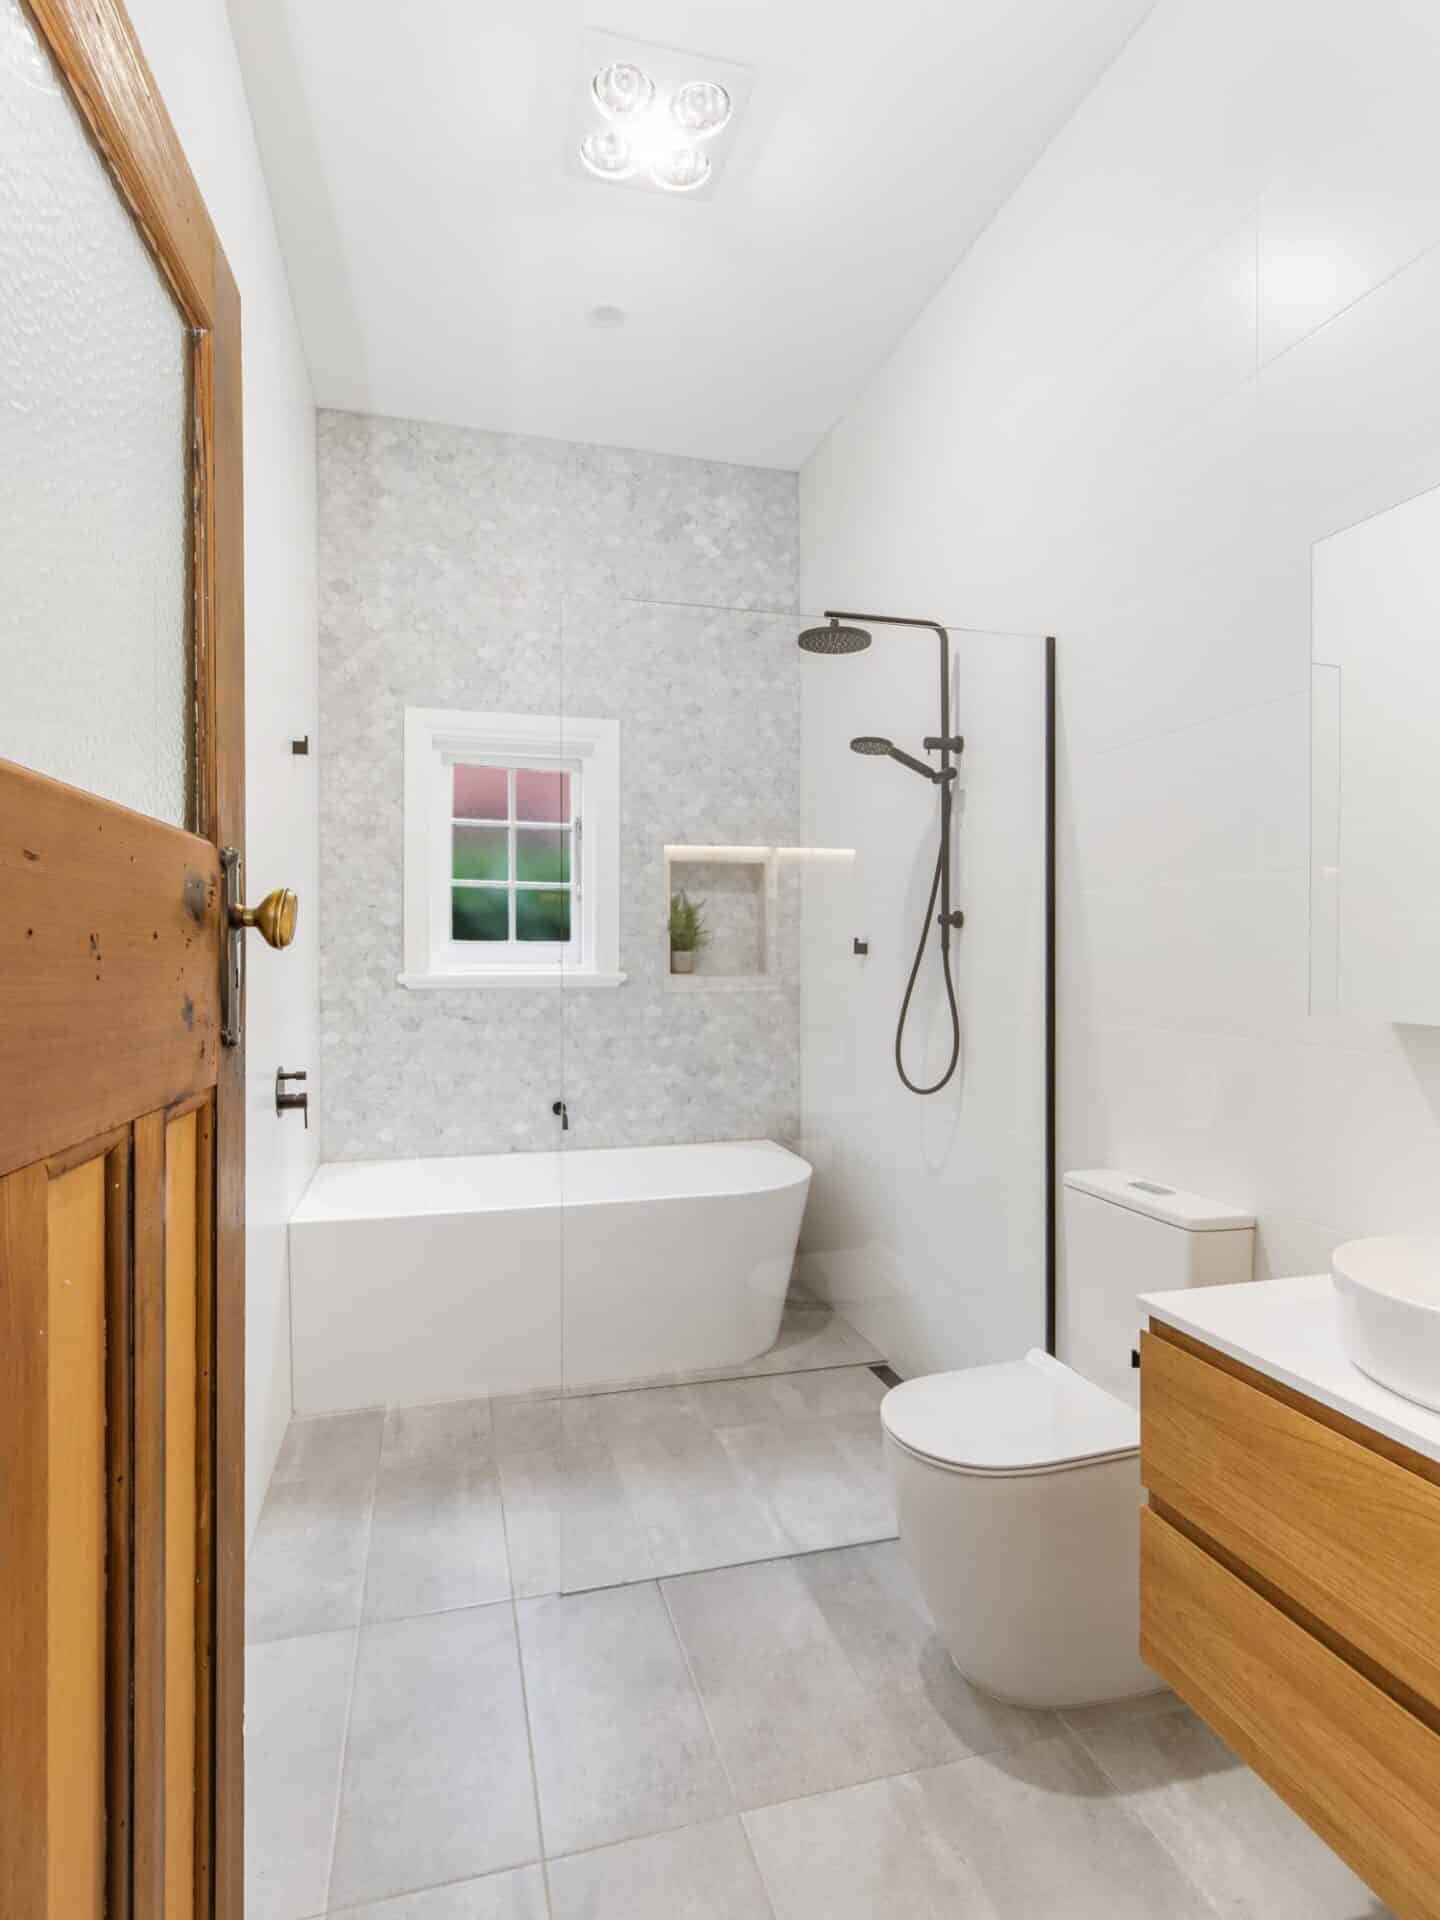 Bathroom Renovations Services by Bayview Renovations